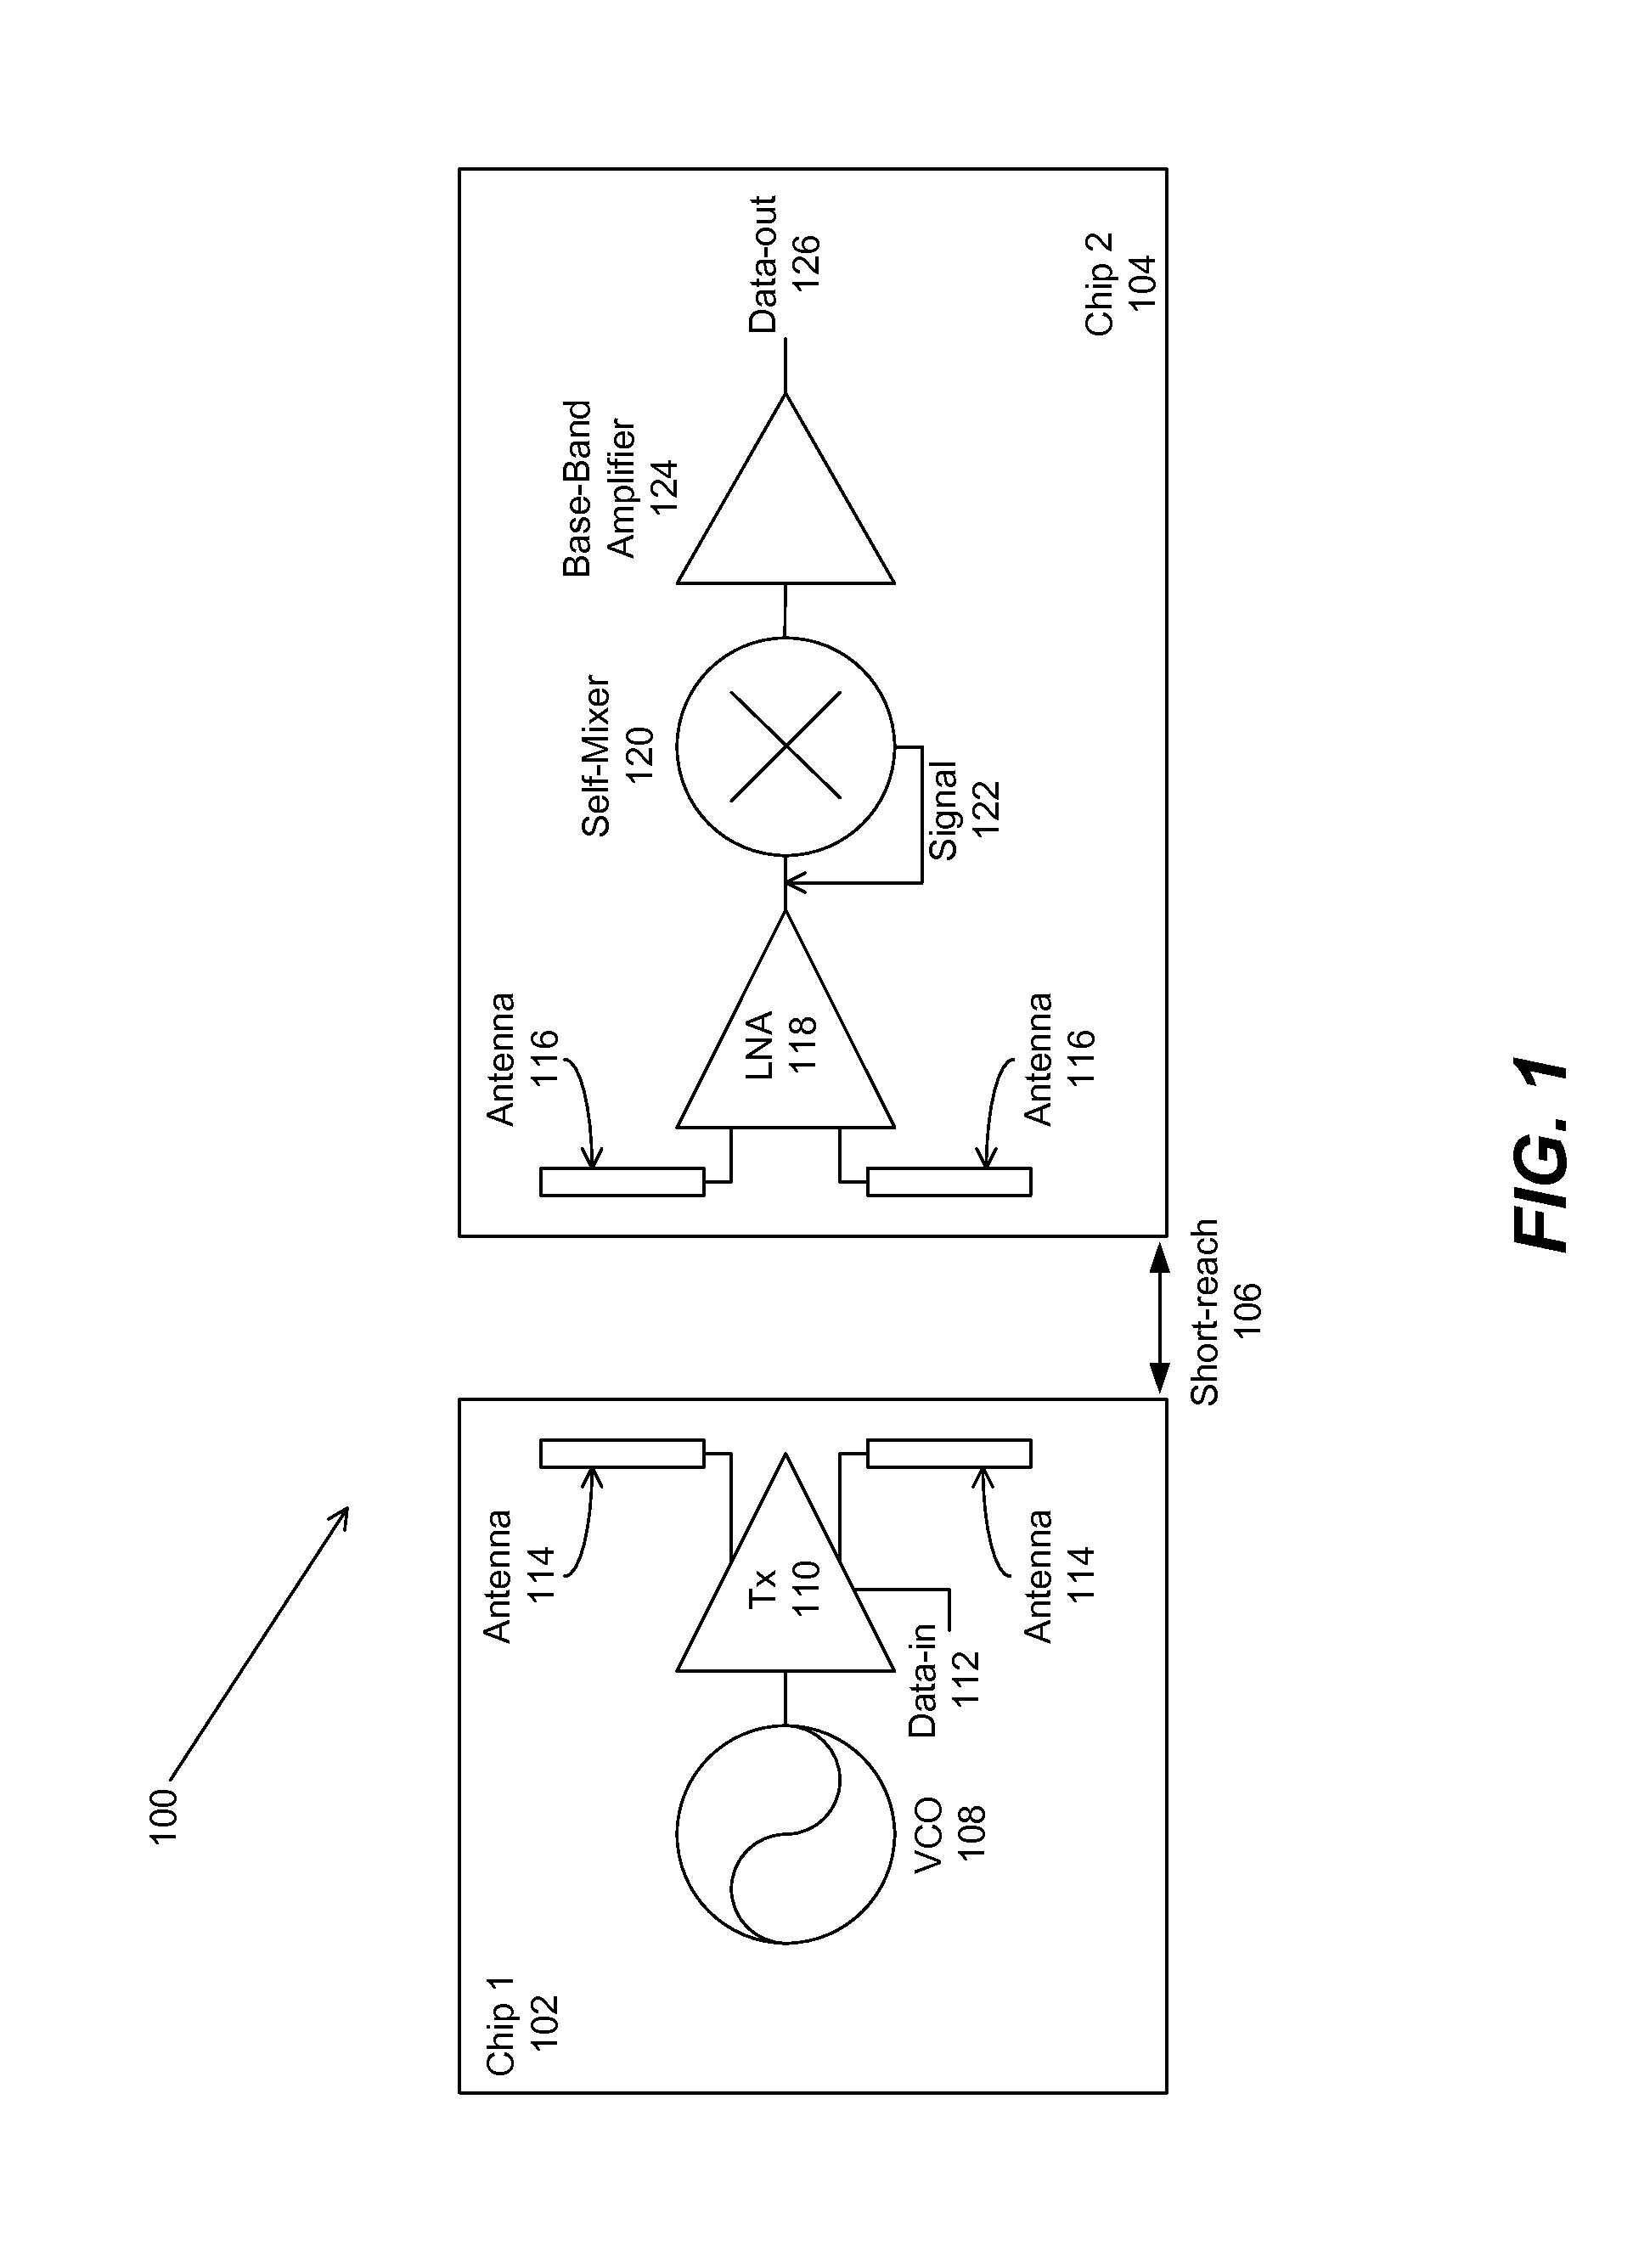 Milli-meter-wave-wireless-interconnect (m2w2-interconnect)method for short-range communications with ultra-high data rate capability